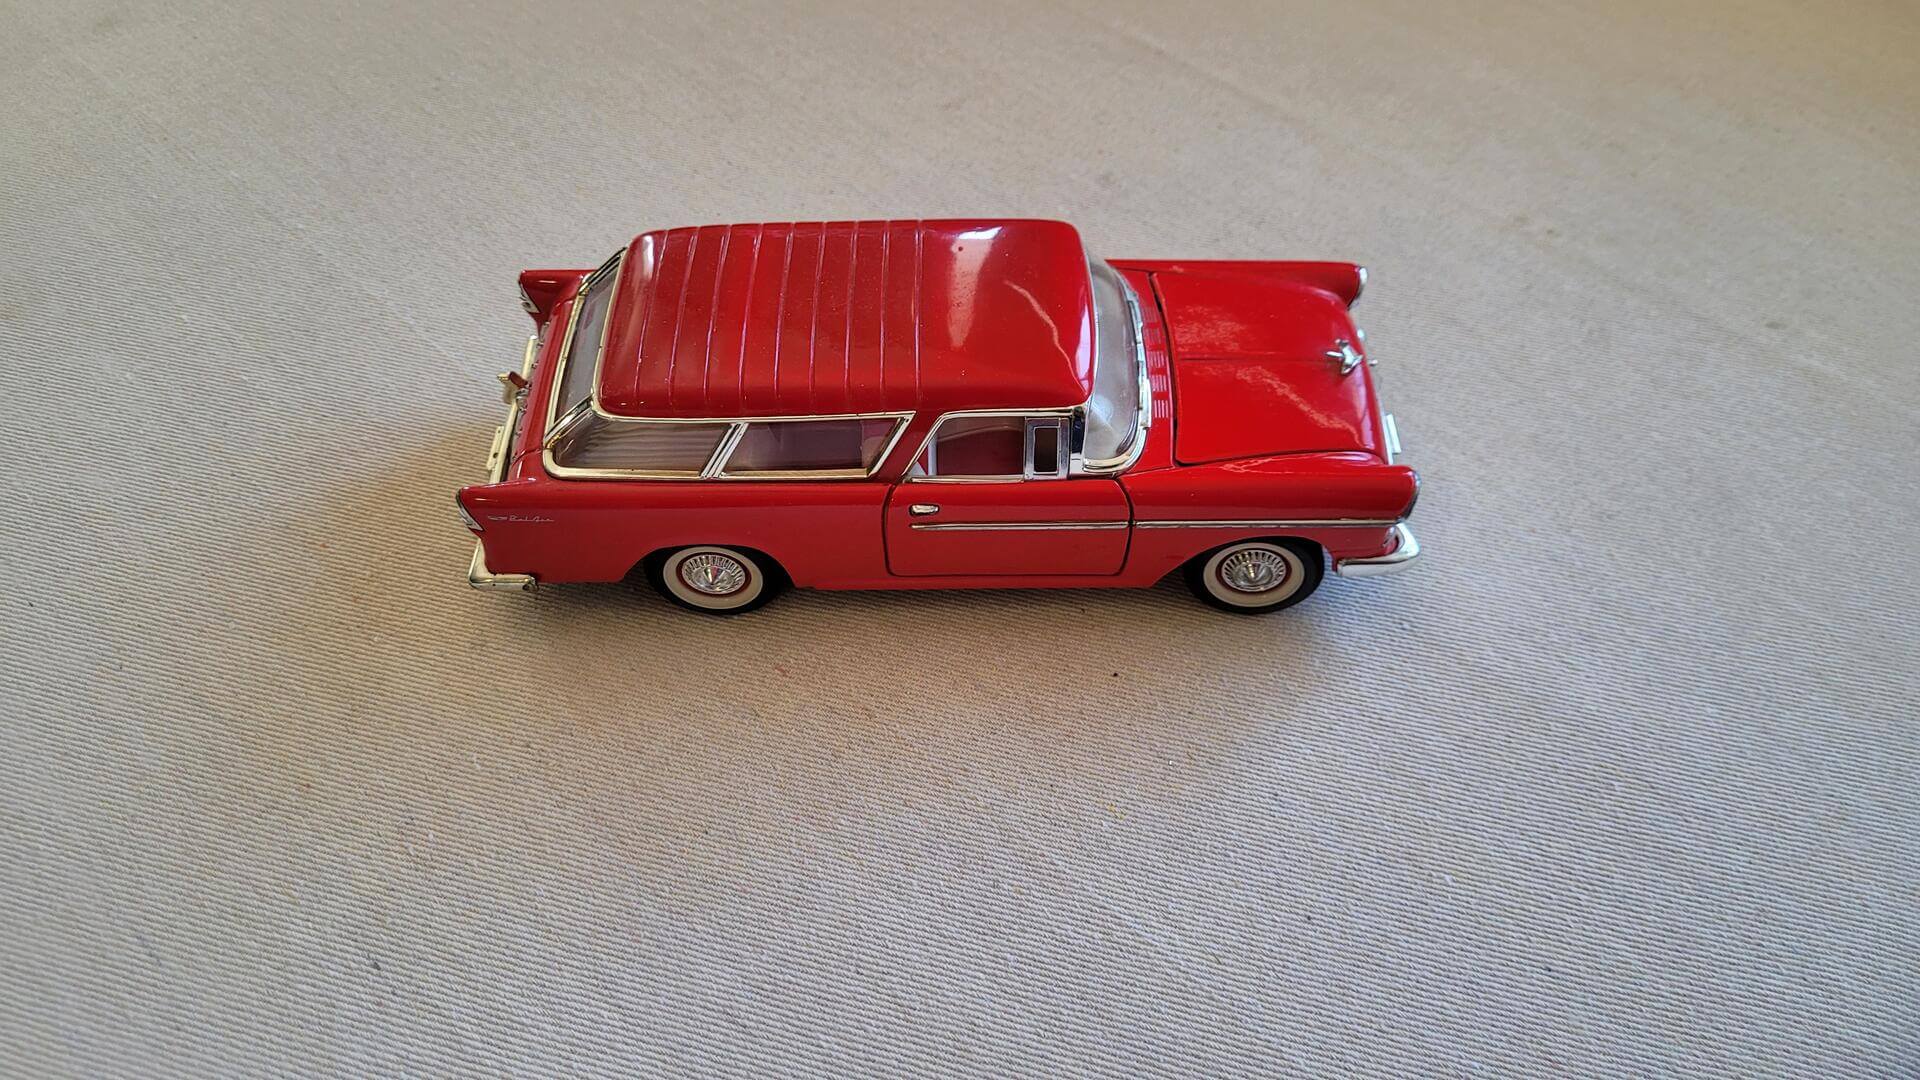 1955-red-chevy-bel-air-nomad-1:24-scale-diecast-model-car-retro-collectible-toy-metal-diecast-car-models-top-view